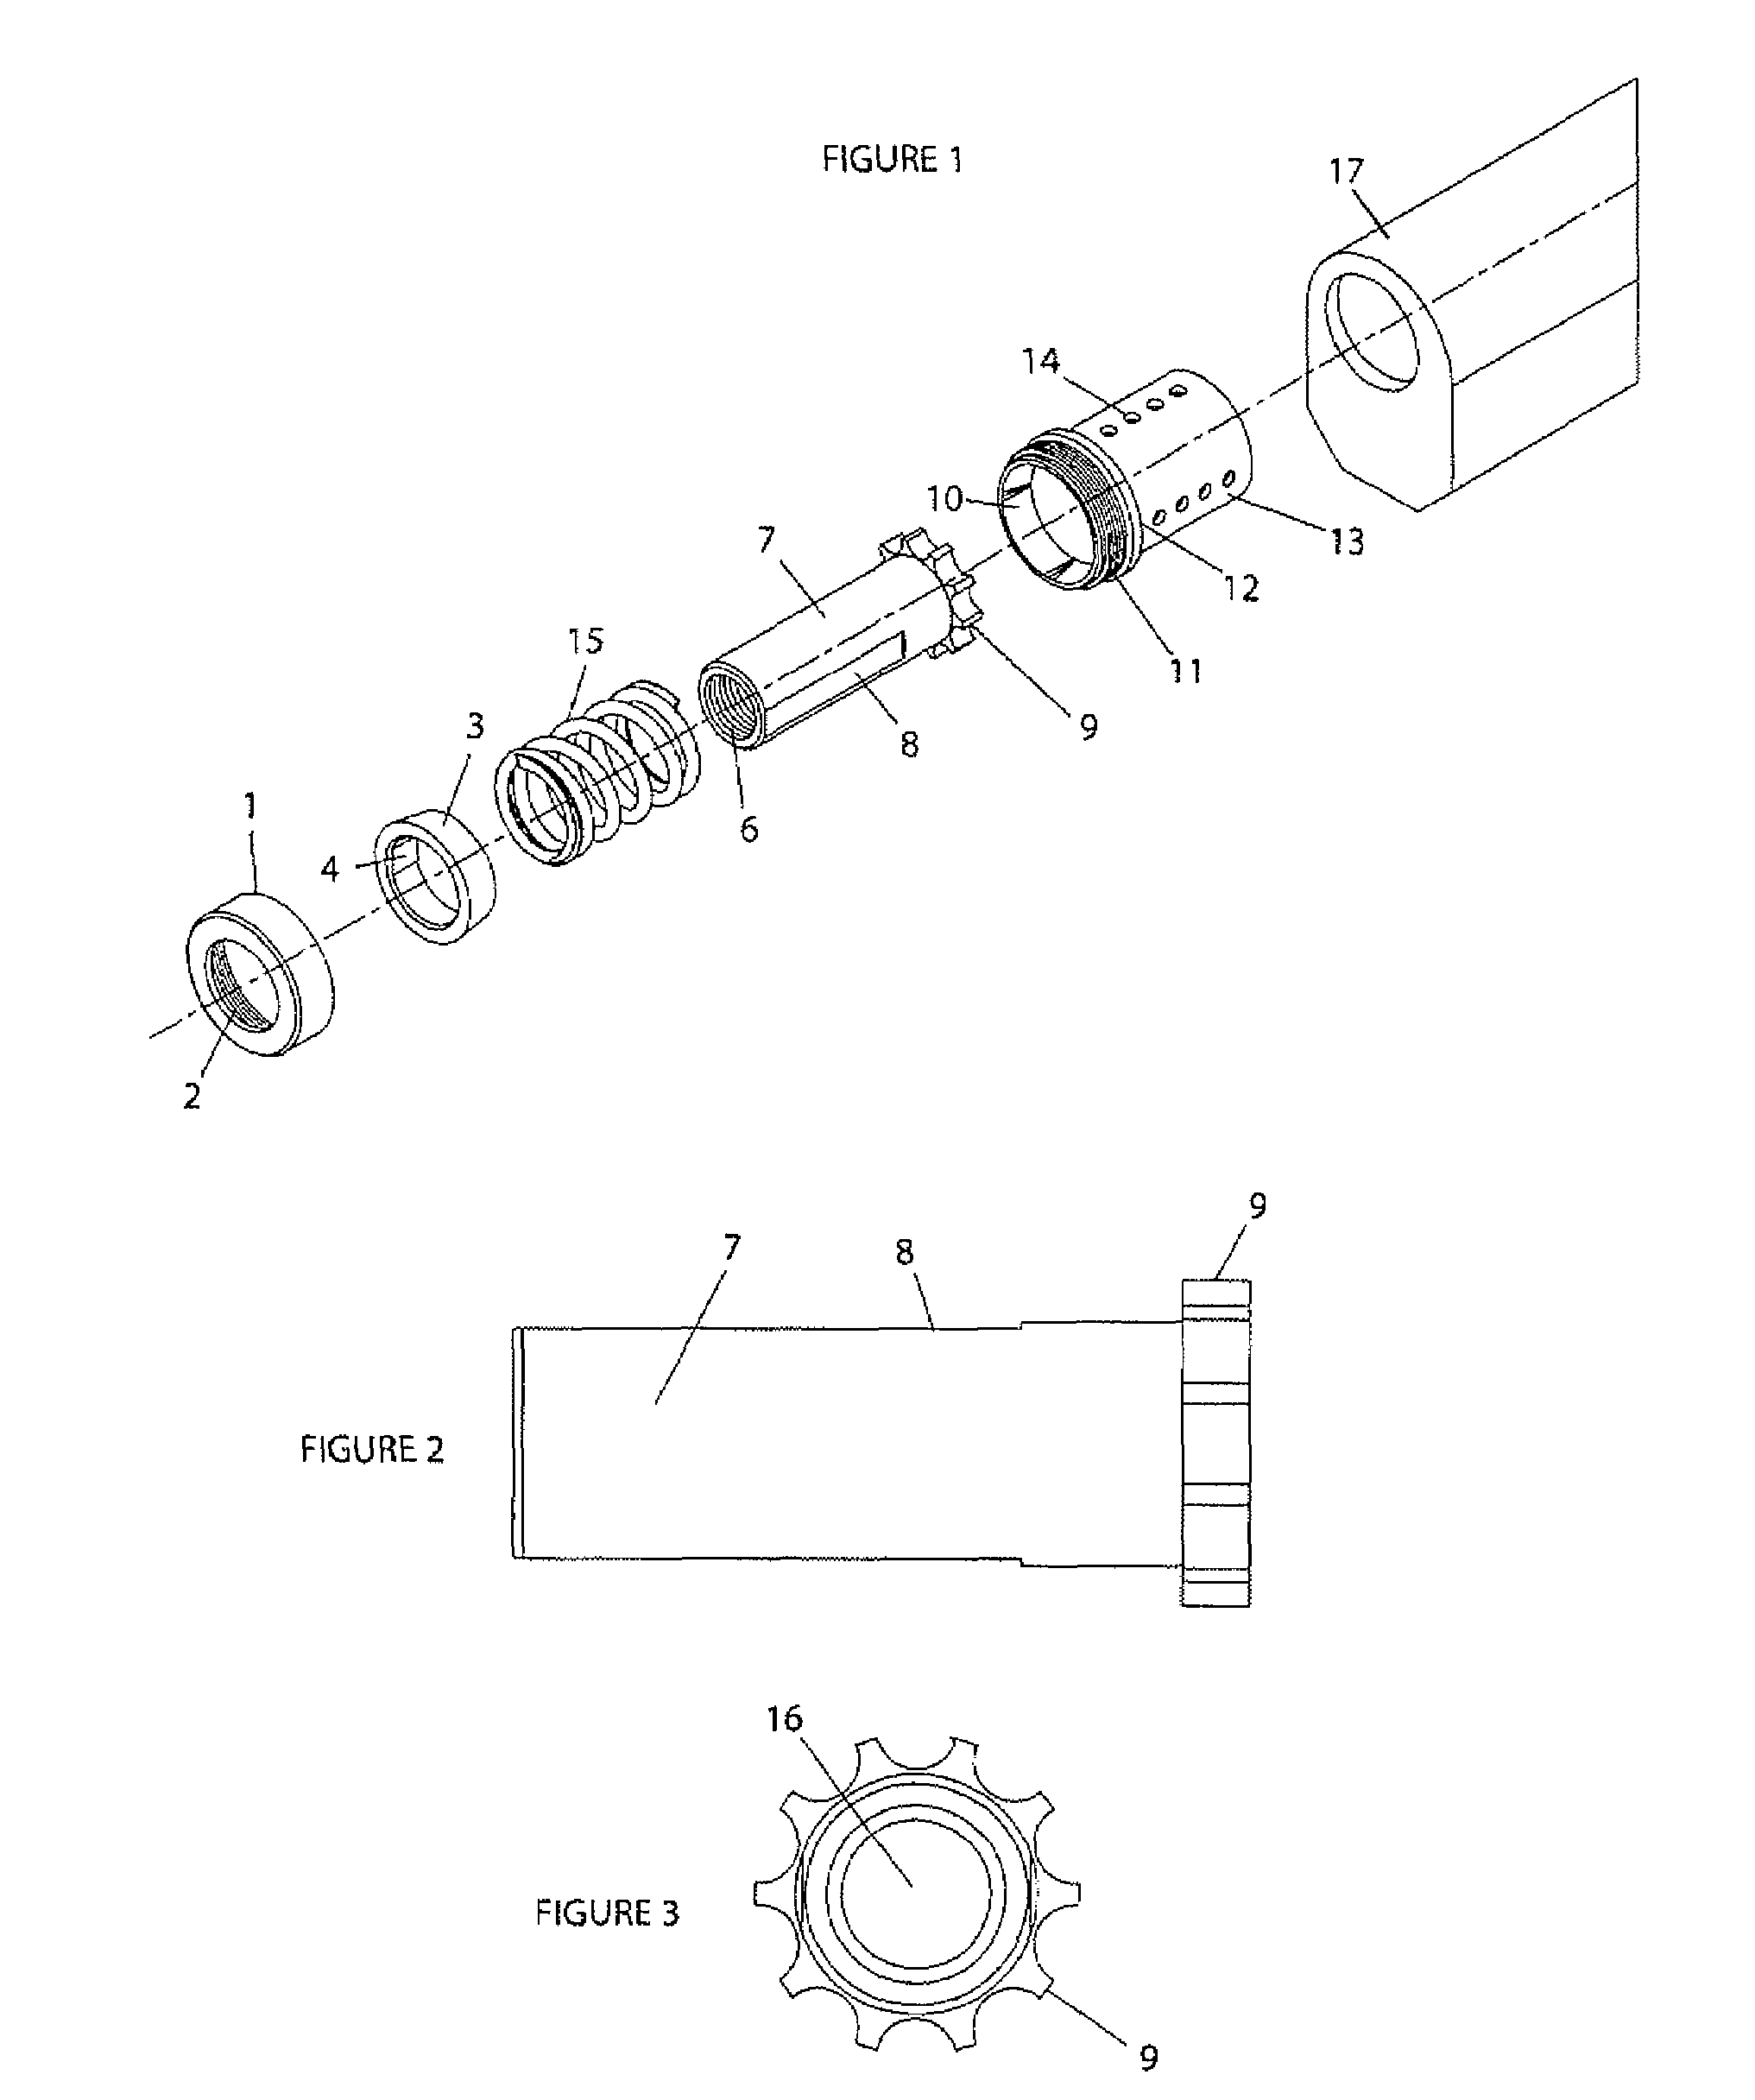 Orientation apparatus for eccentric firearm noise suppressor and assembly method